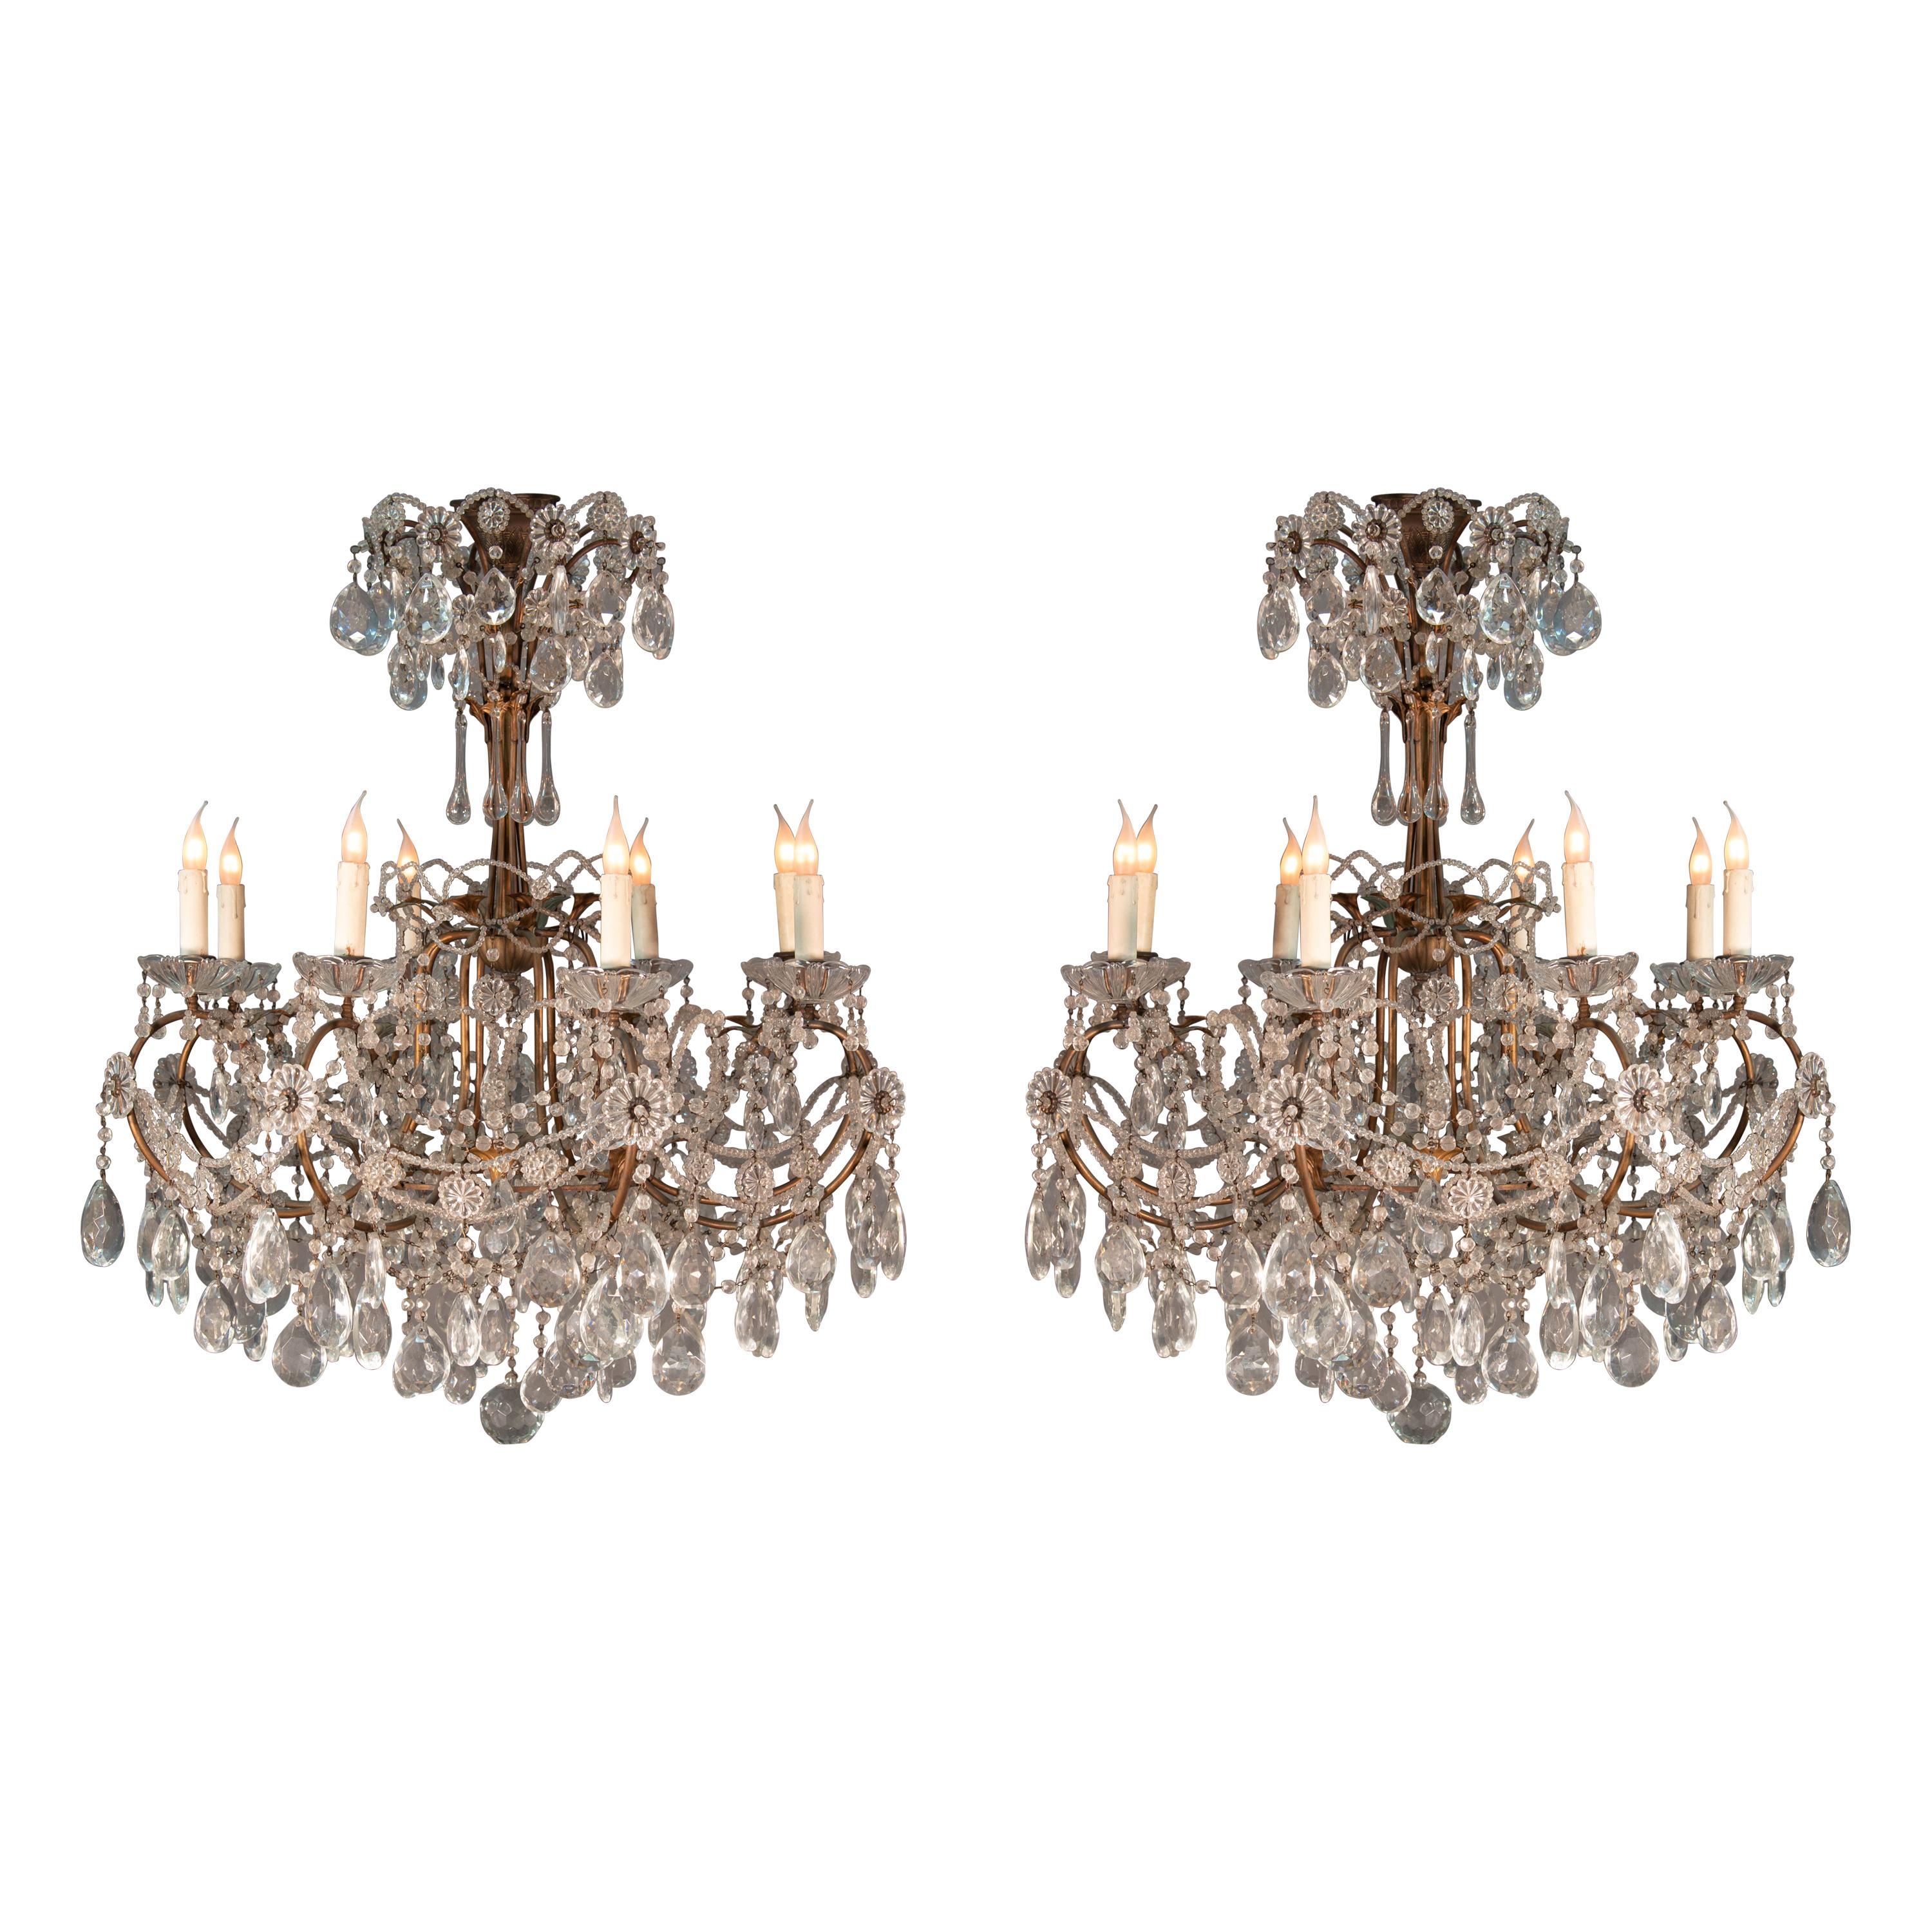 Pair of Italian Chandeliers in Glass Crystal and Metal